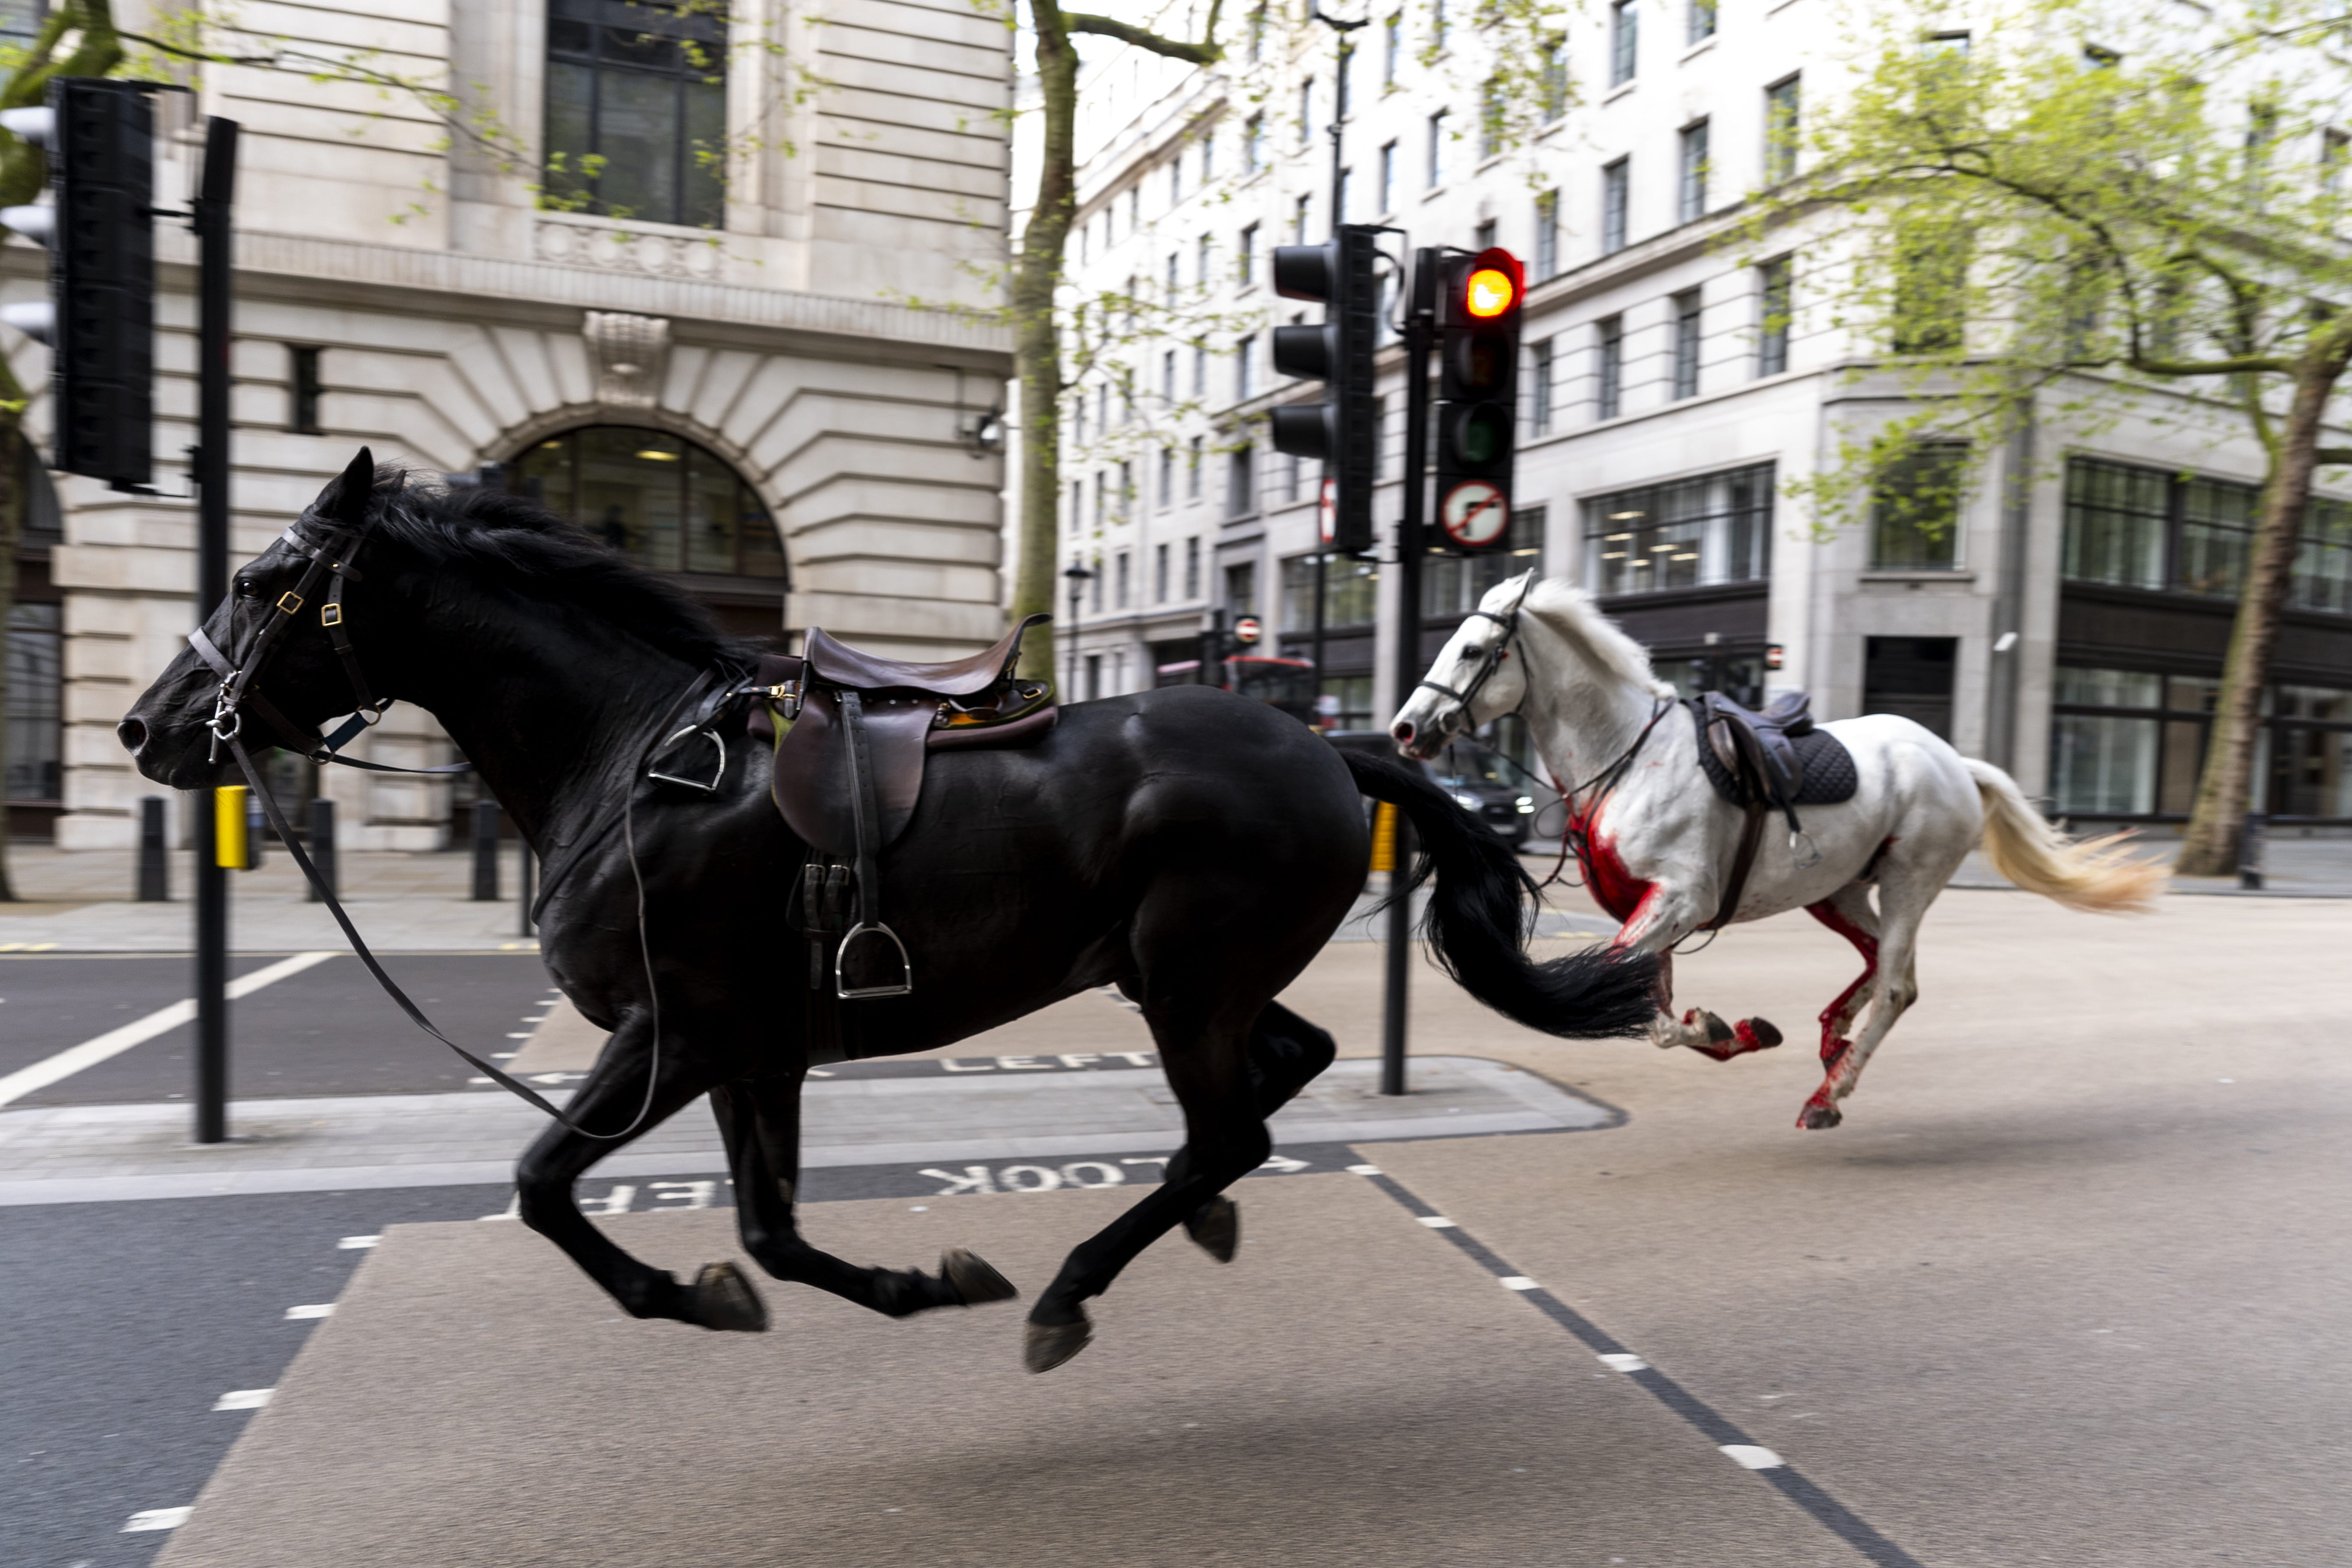 One of the horses was covered in blood as two of the animals galloped in the road near Aldwych. (Jordan Pettitt/PA)